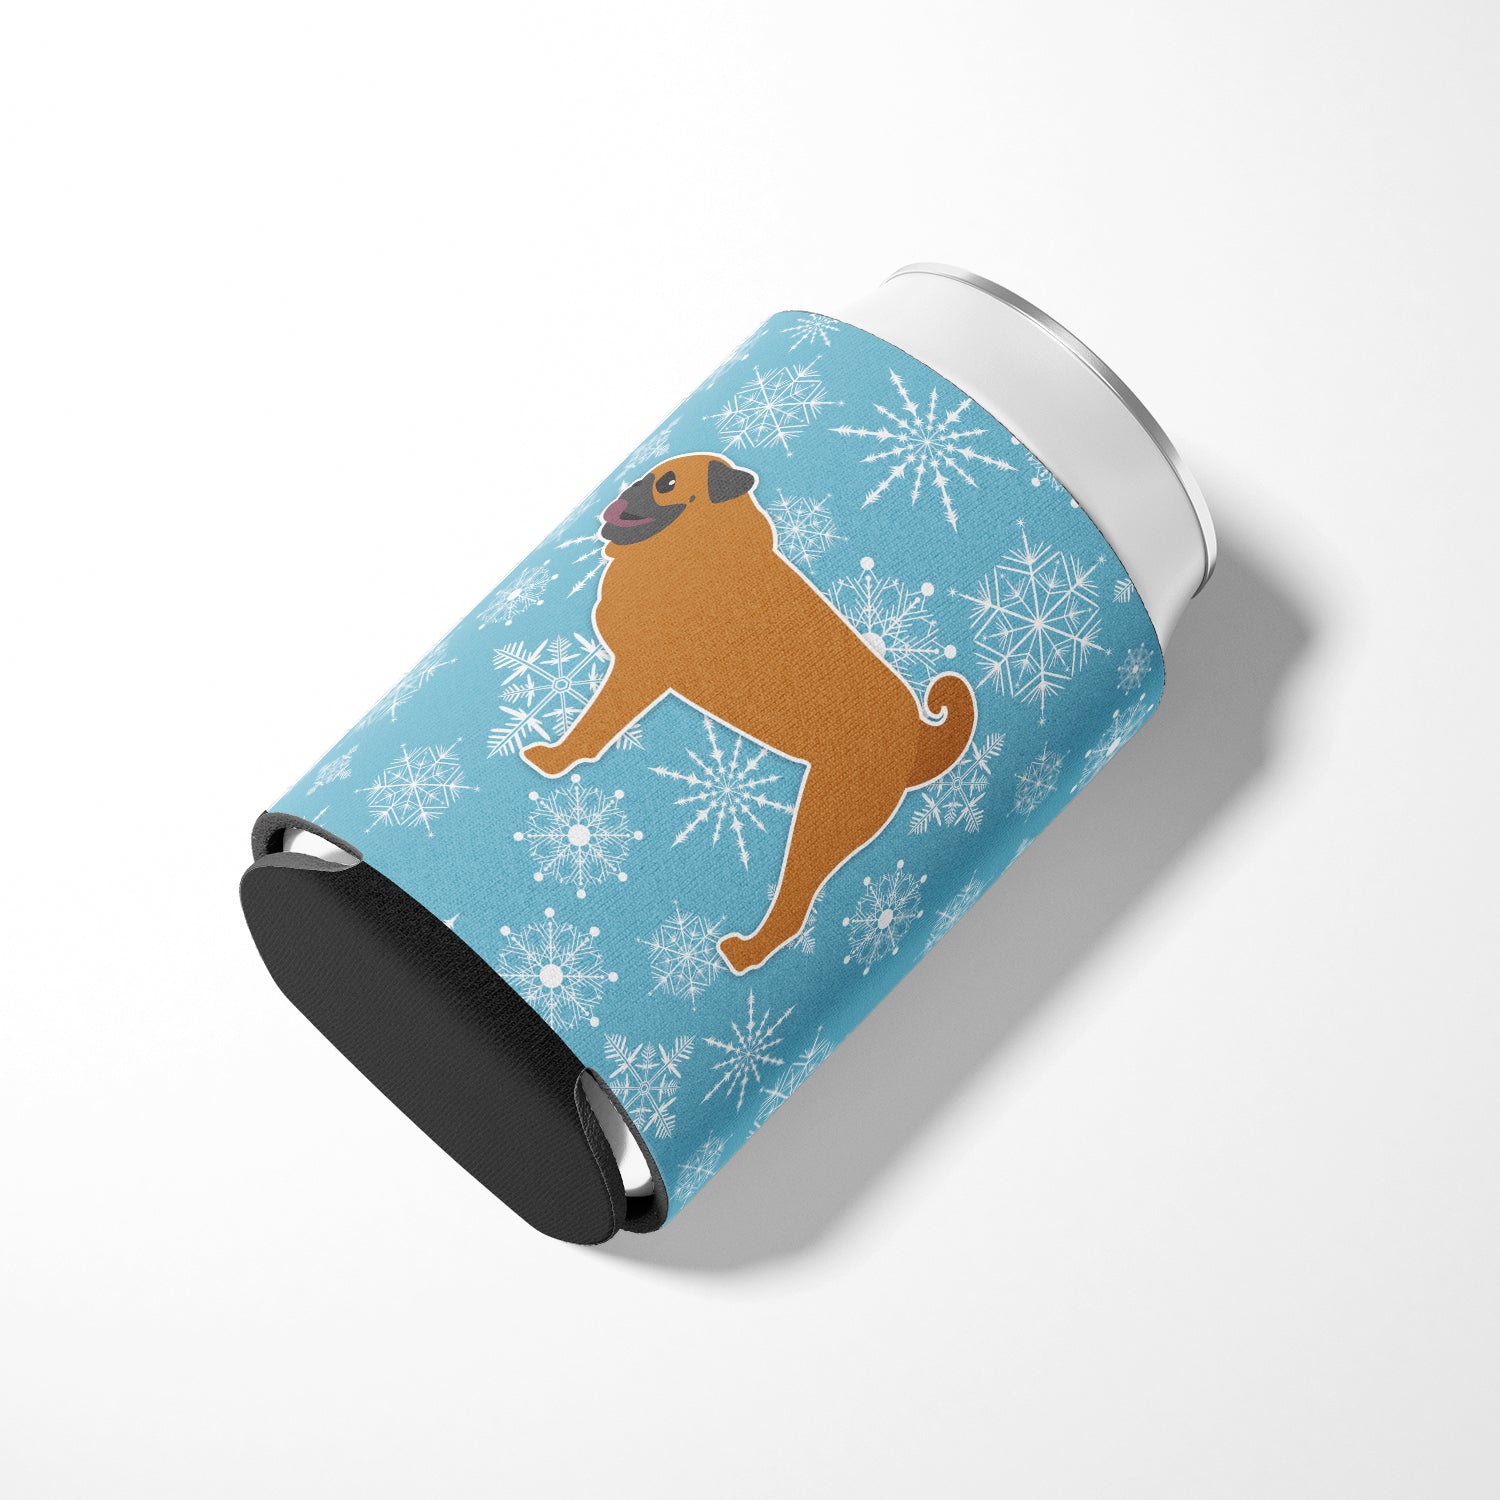 Winter Snowflake Pug Can or Bottle Hugger BB3547CC  the-store.com.